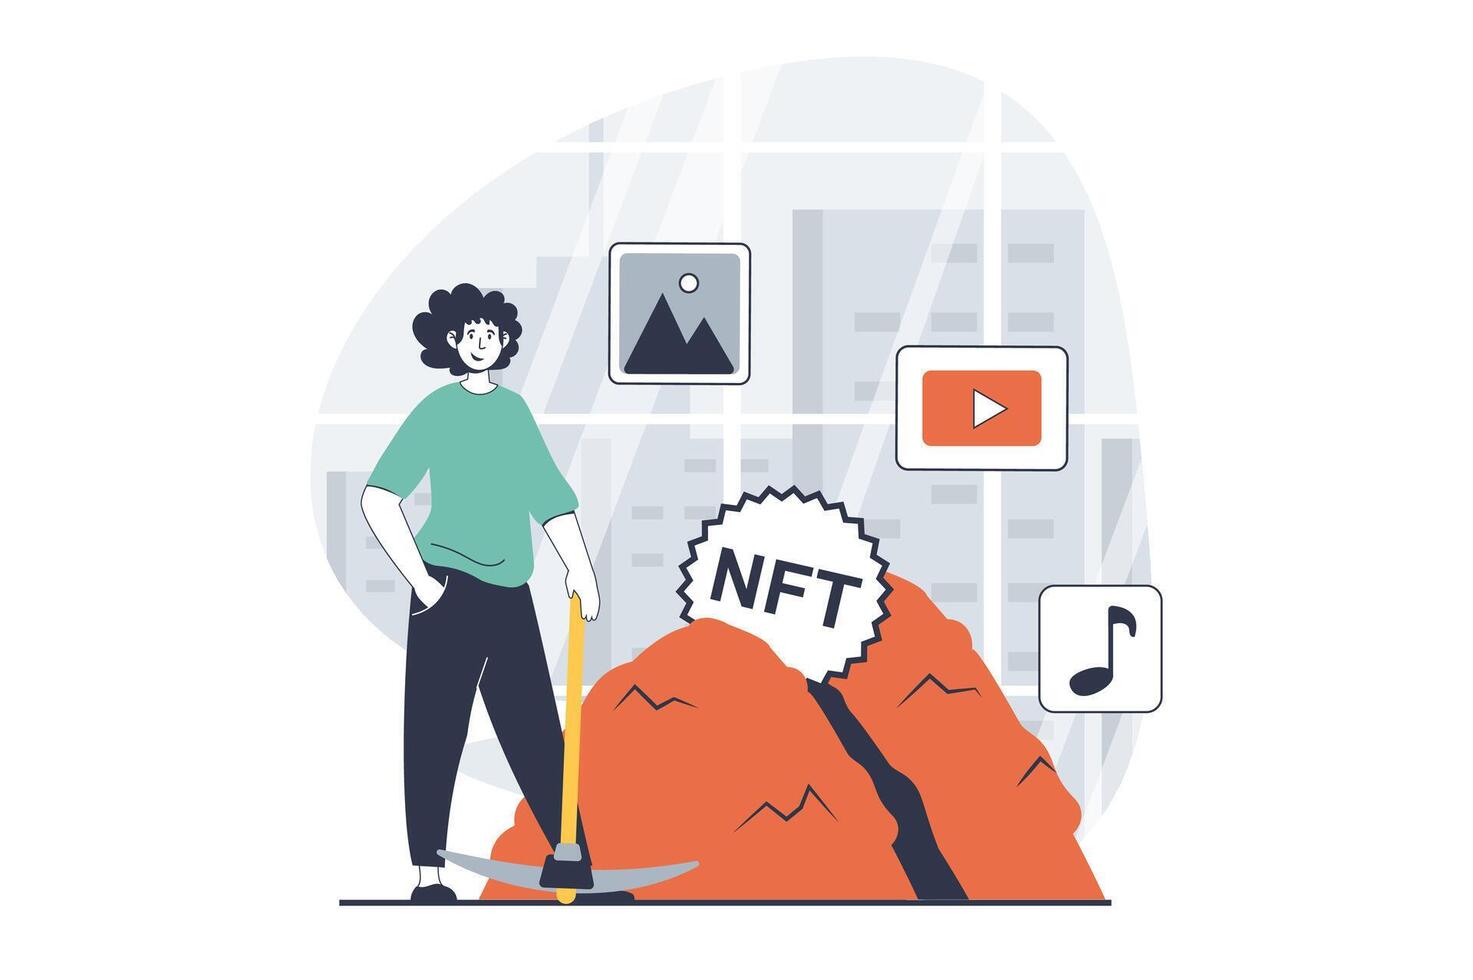 NFT token concept with people scene in flat design for web. Man with pickaxe creating digital content with non fungible token for sell. Vector illustration for social media banner, marketing material.